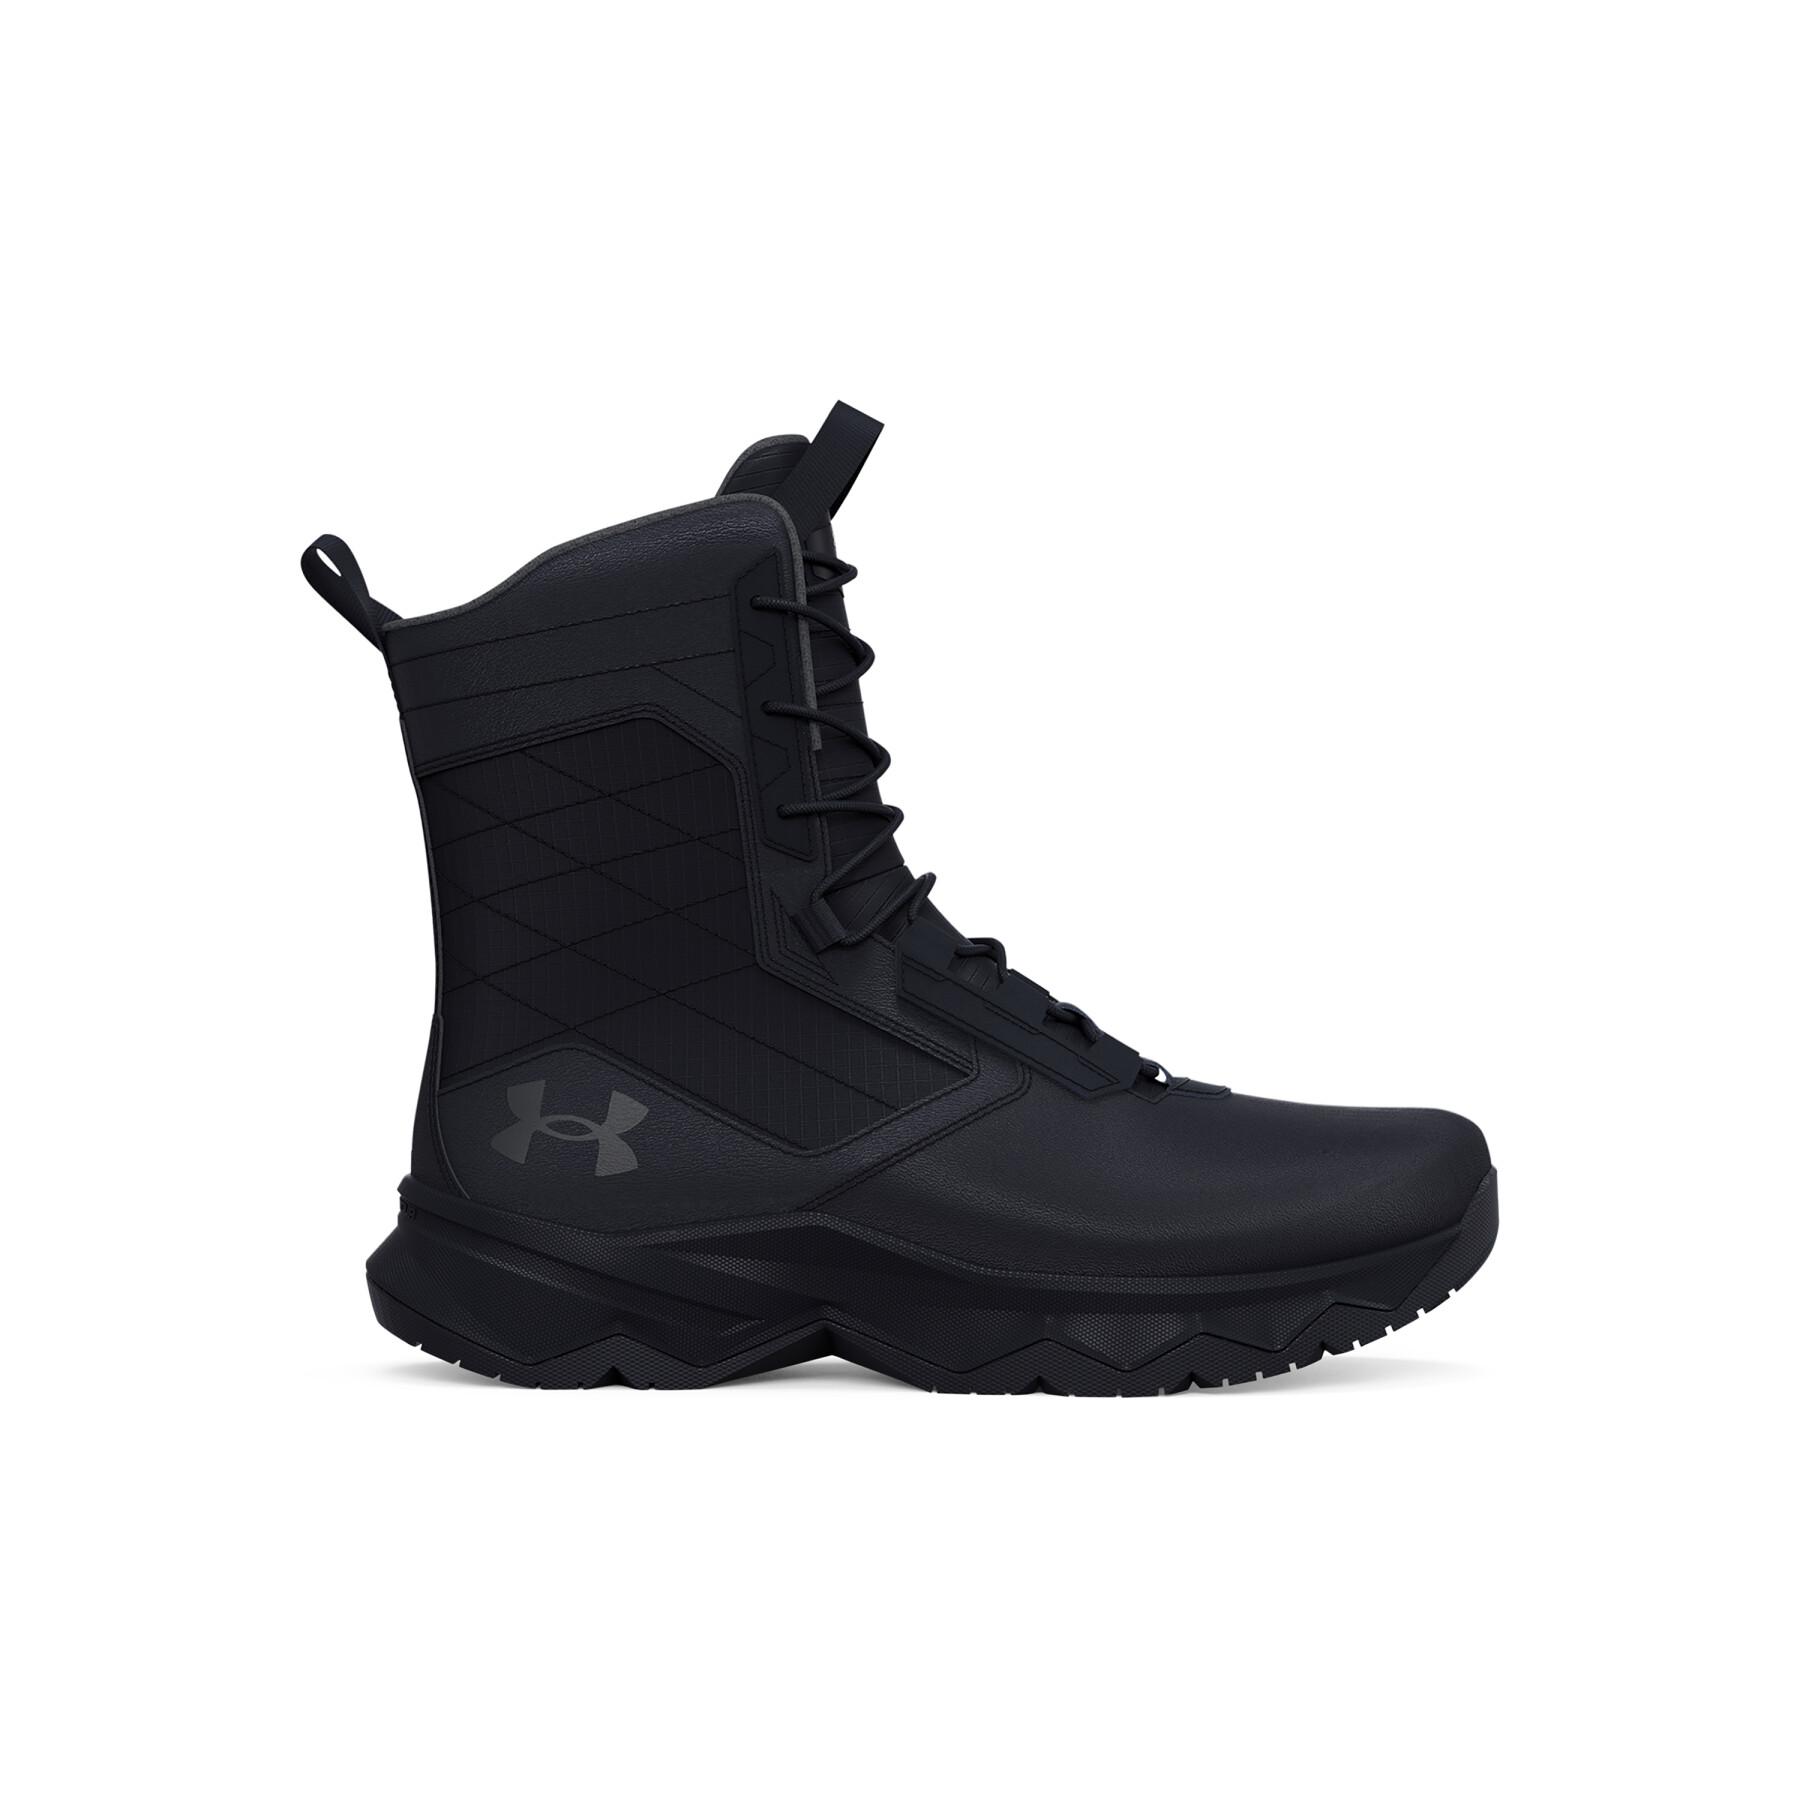 Hiking shoes Under Armour Stellar G2 Tactical - Under Armour - Mens Shoes